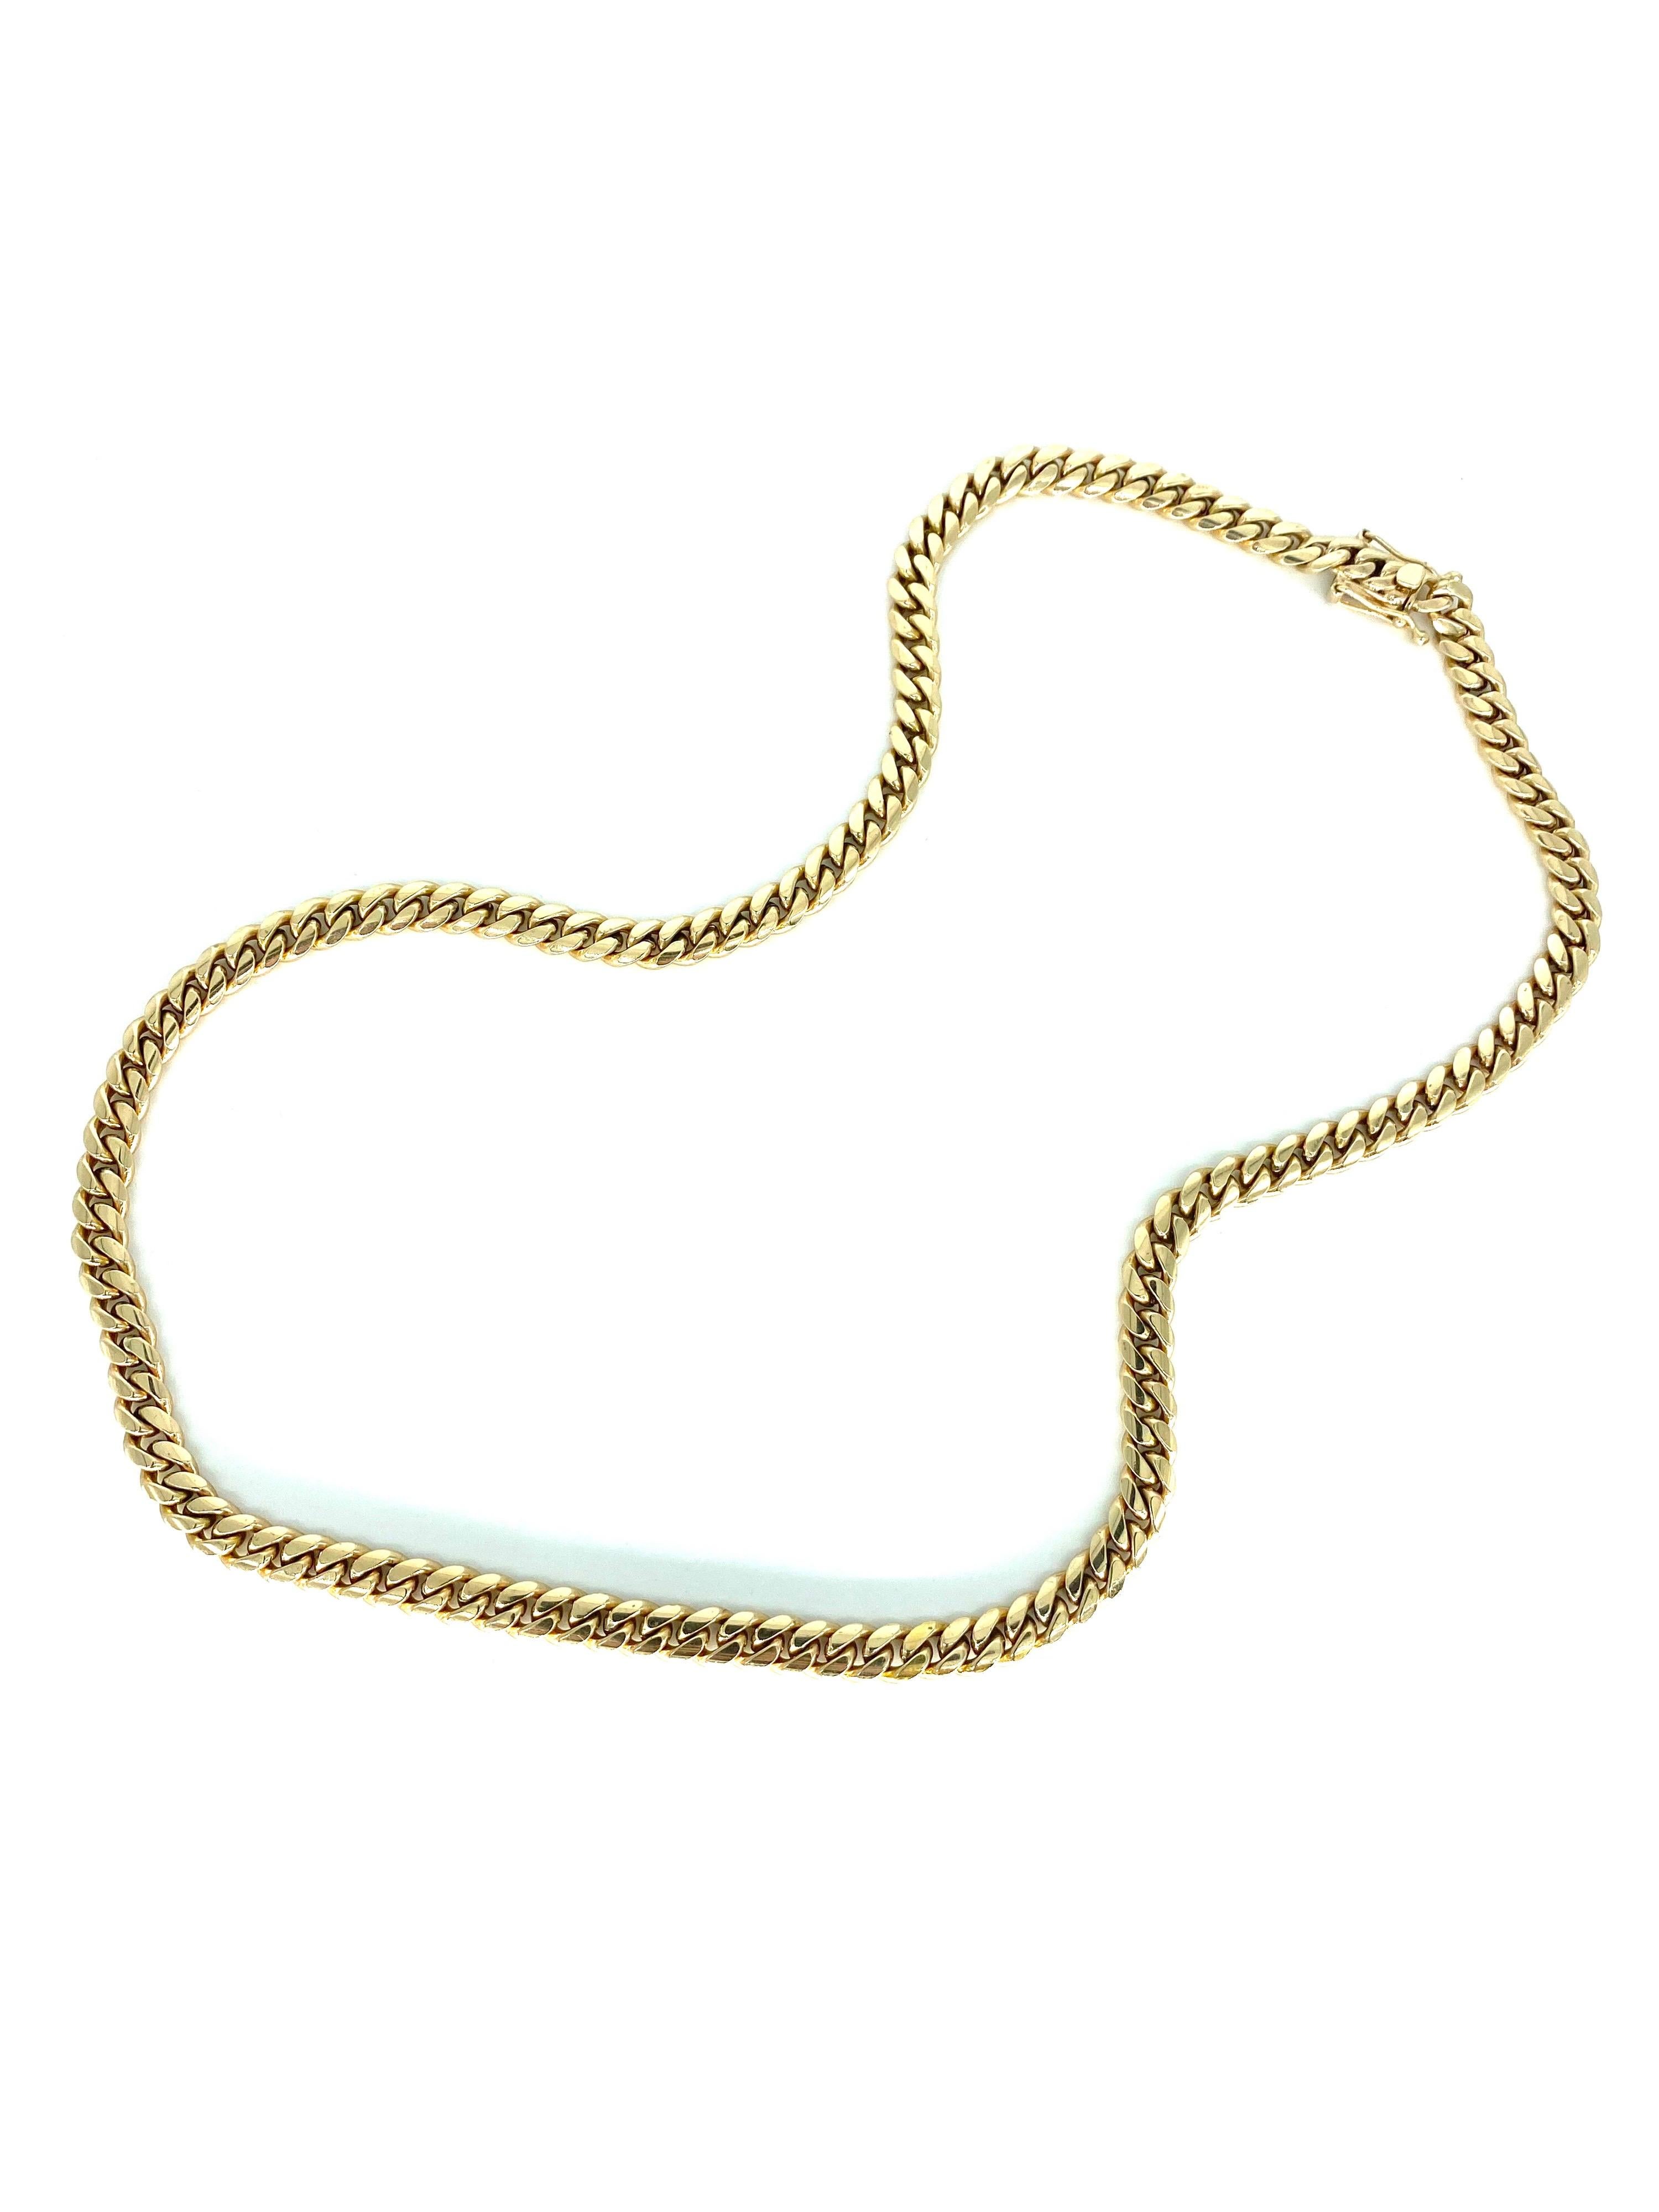 7.5mm 14k Solid Gold Miami Cuban Link Chain 24”
This chain is heavy weighting 108.4 grams solid 14k gold and stamped. 
Very elegant looking and very shiny in the sun/light. Will get you complements!